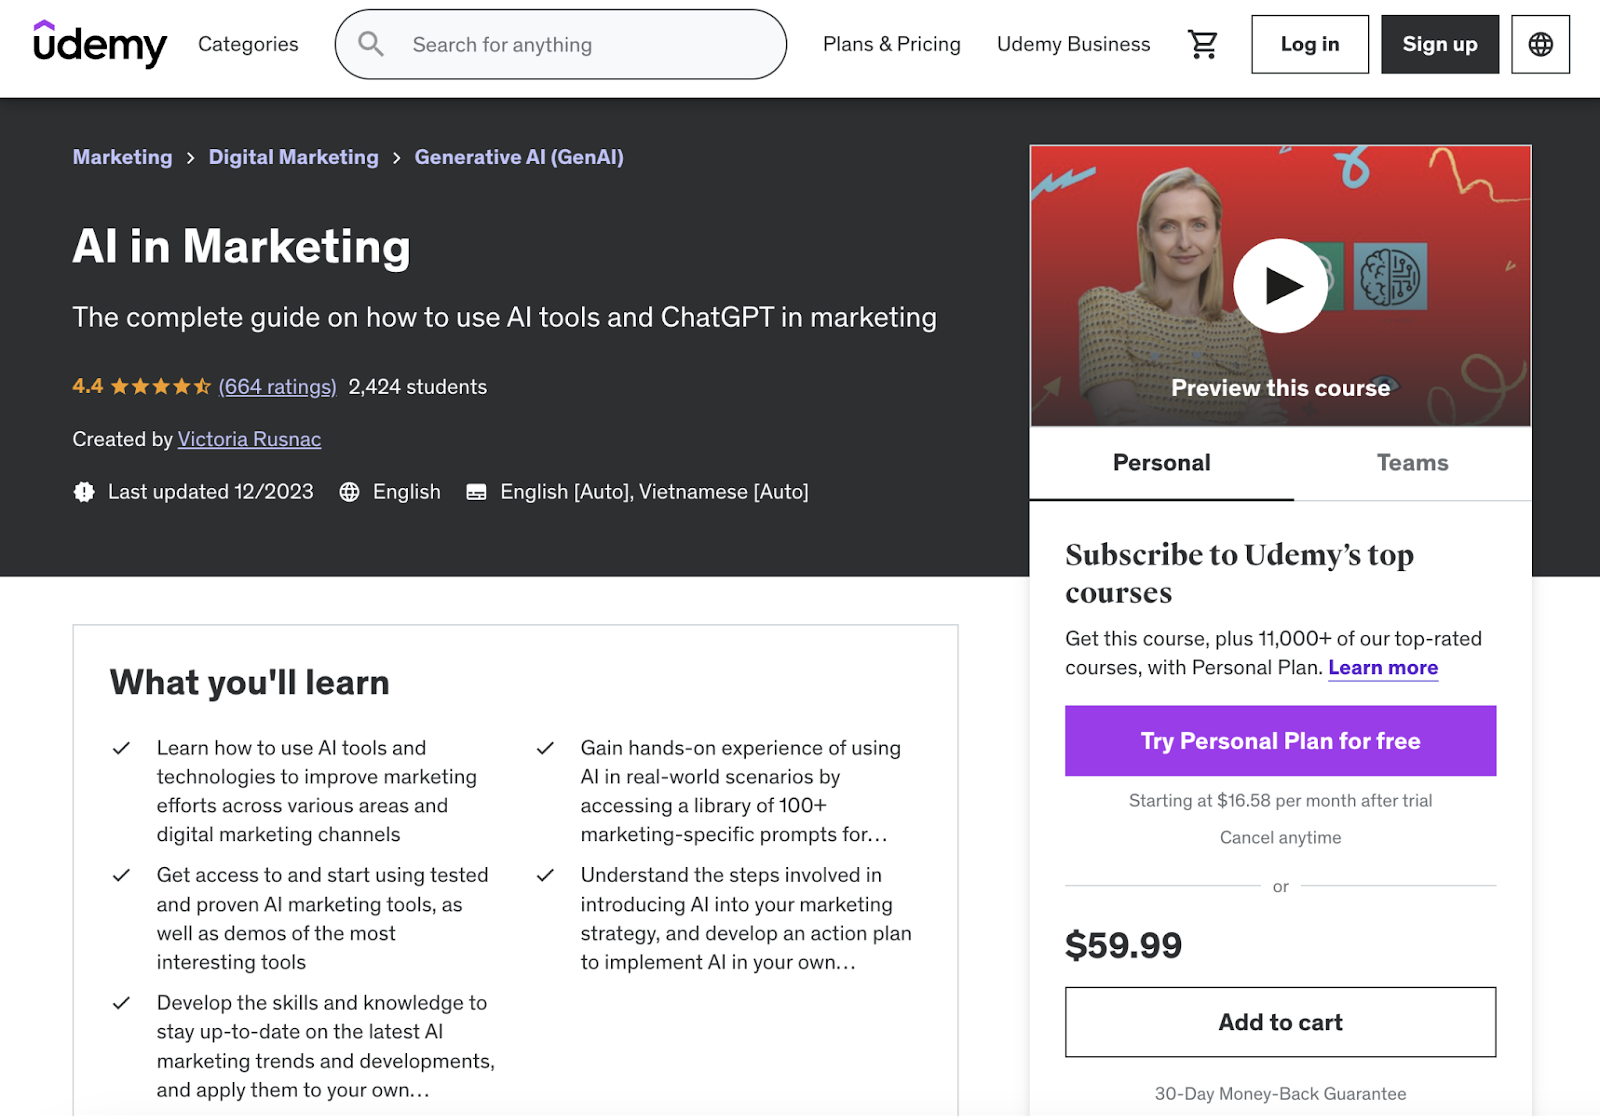 Udemy's AI in Marketing course page